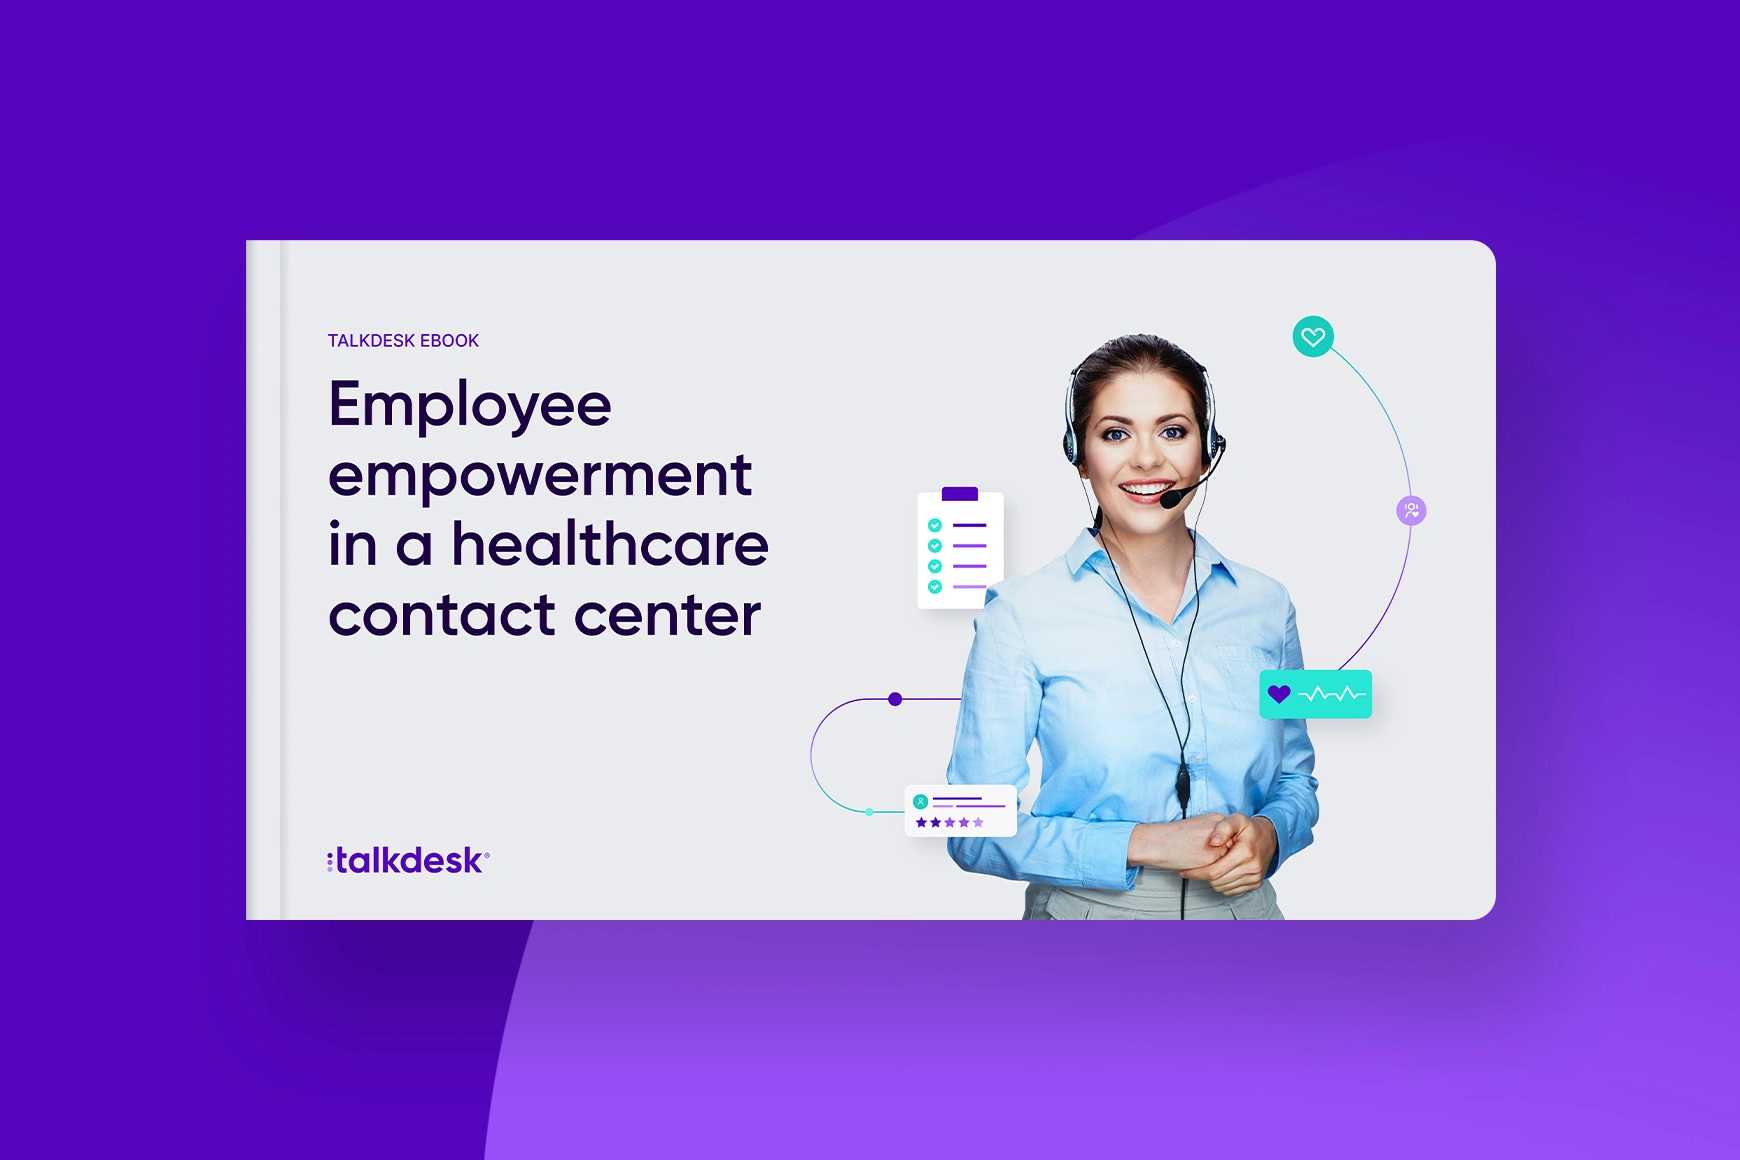 Employee empowerment in a healthcare contact center